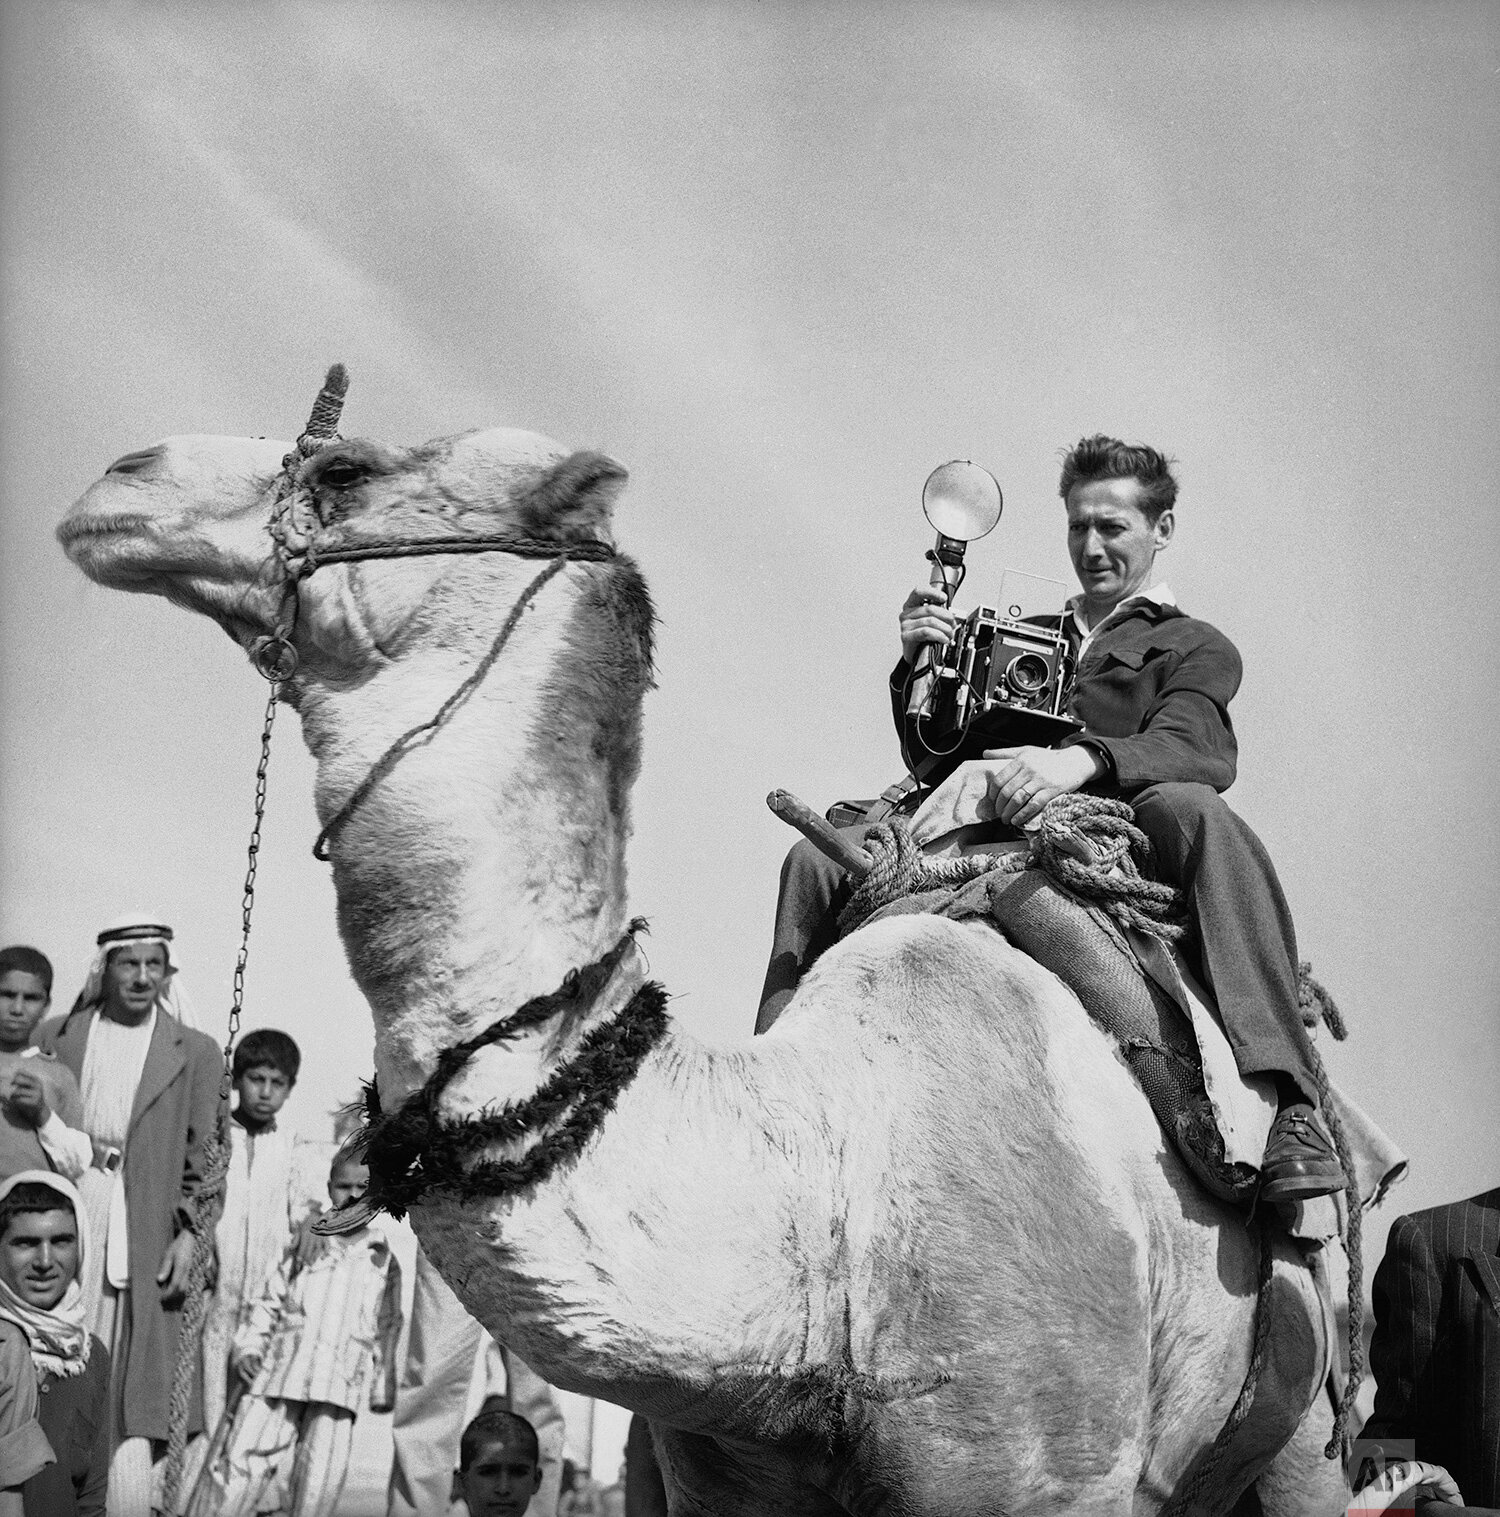  Paris staff photographer Jean-Jacques Levy riding a camel whilst on assignment on Dec. 3, 1956, in Khan Yunis in the Gaza strip. (AP Photo) 